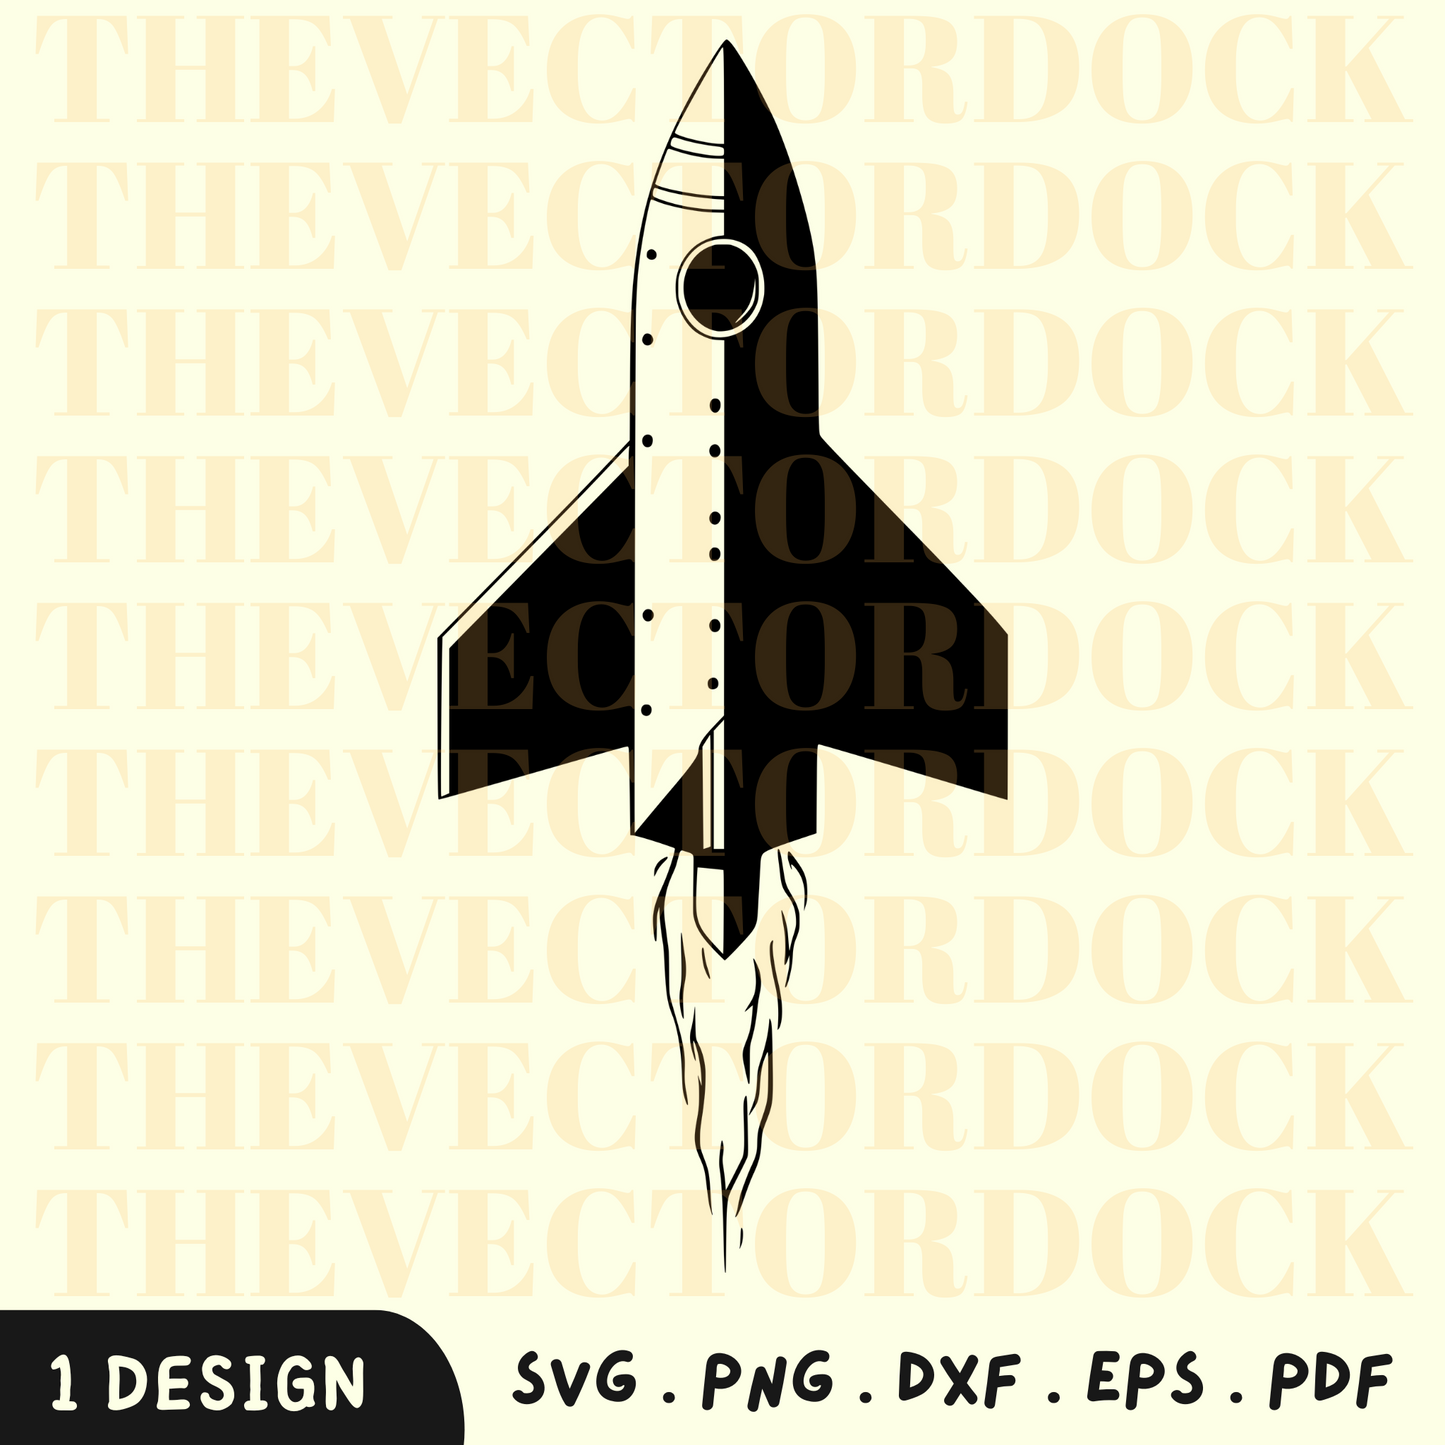 Starship SVG Design, Starship SVG, Starship Silhouette, Starship PNG, Spacecraft, Starship Vector